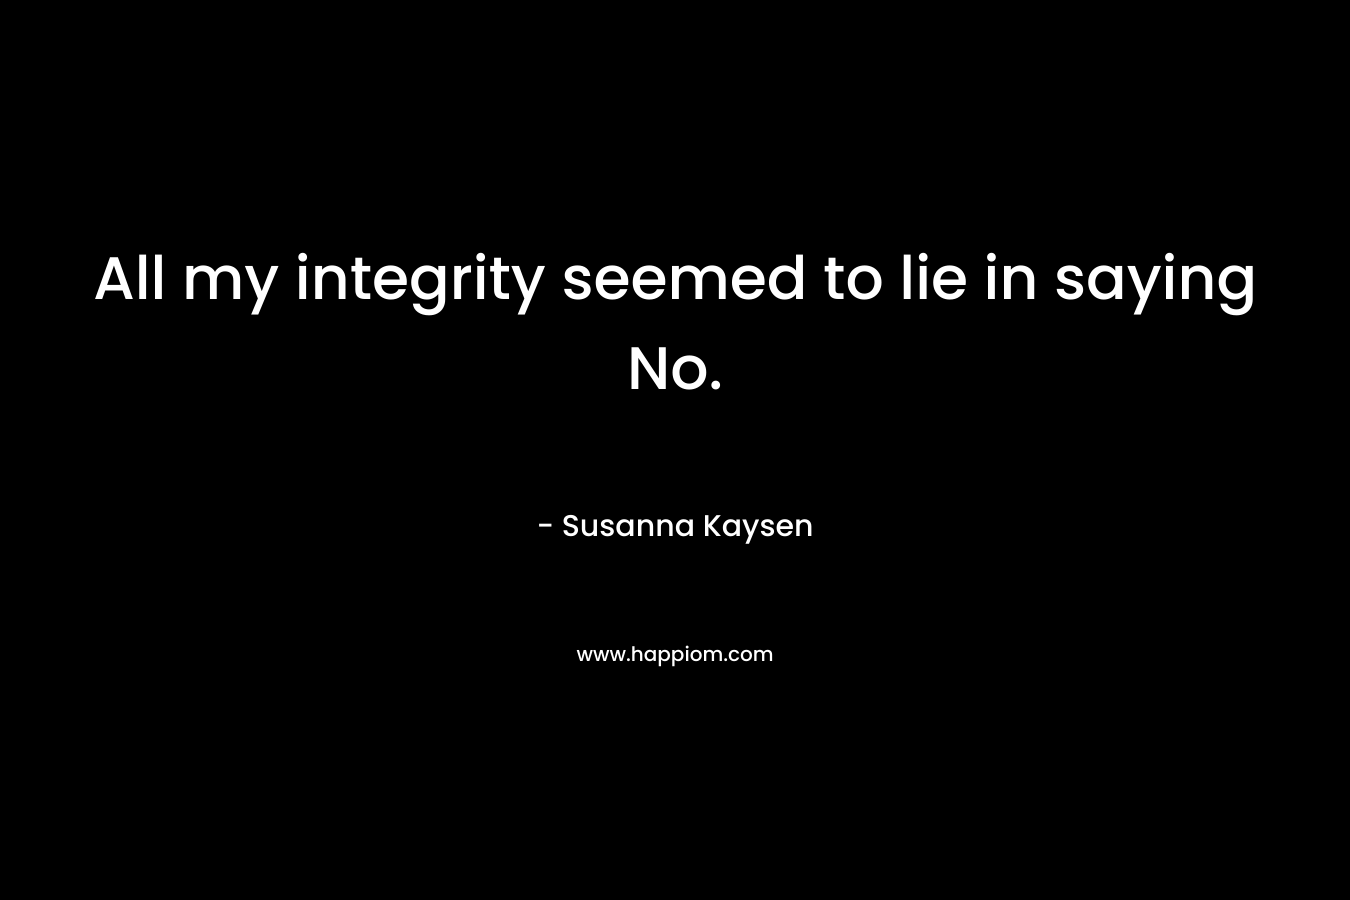 All my integrity seemed to lie in saying No.